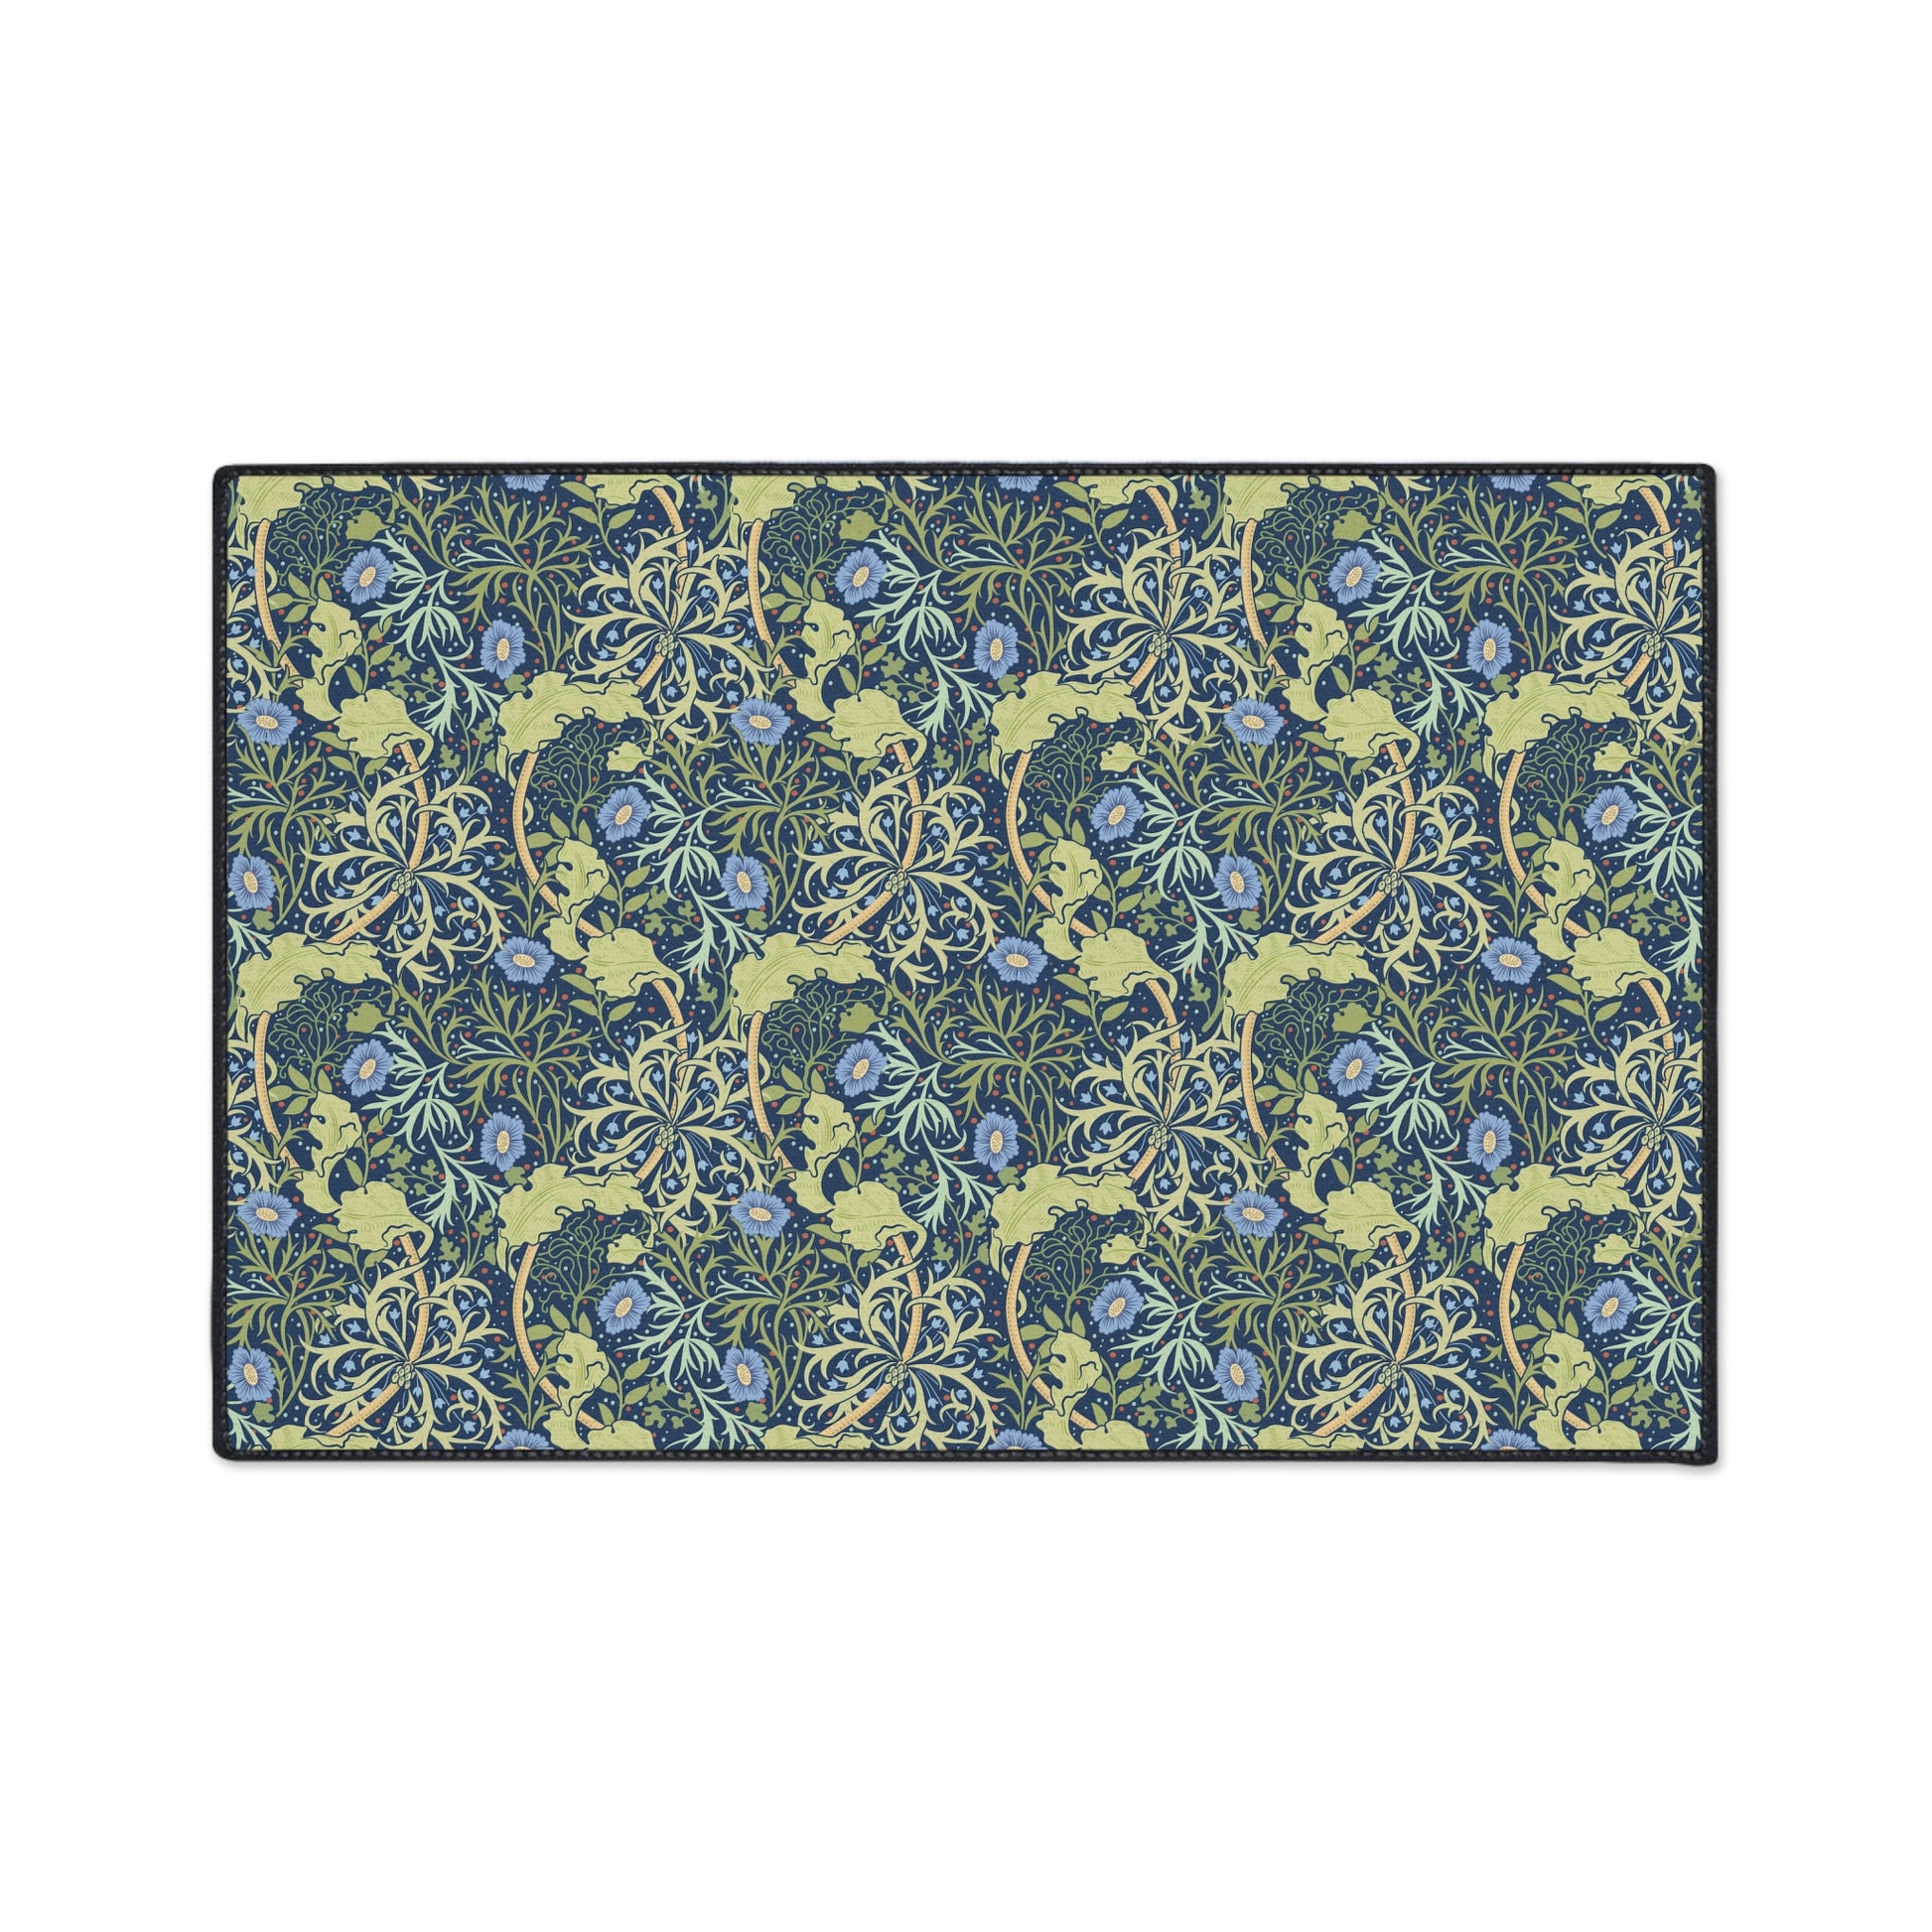 william-morris-co-heavy-duty-floor-mat-seaweed-collection-blue-flowers-3